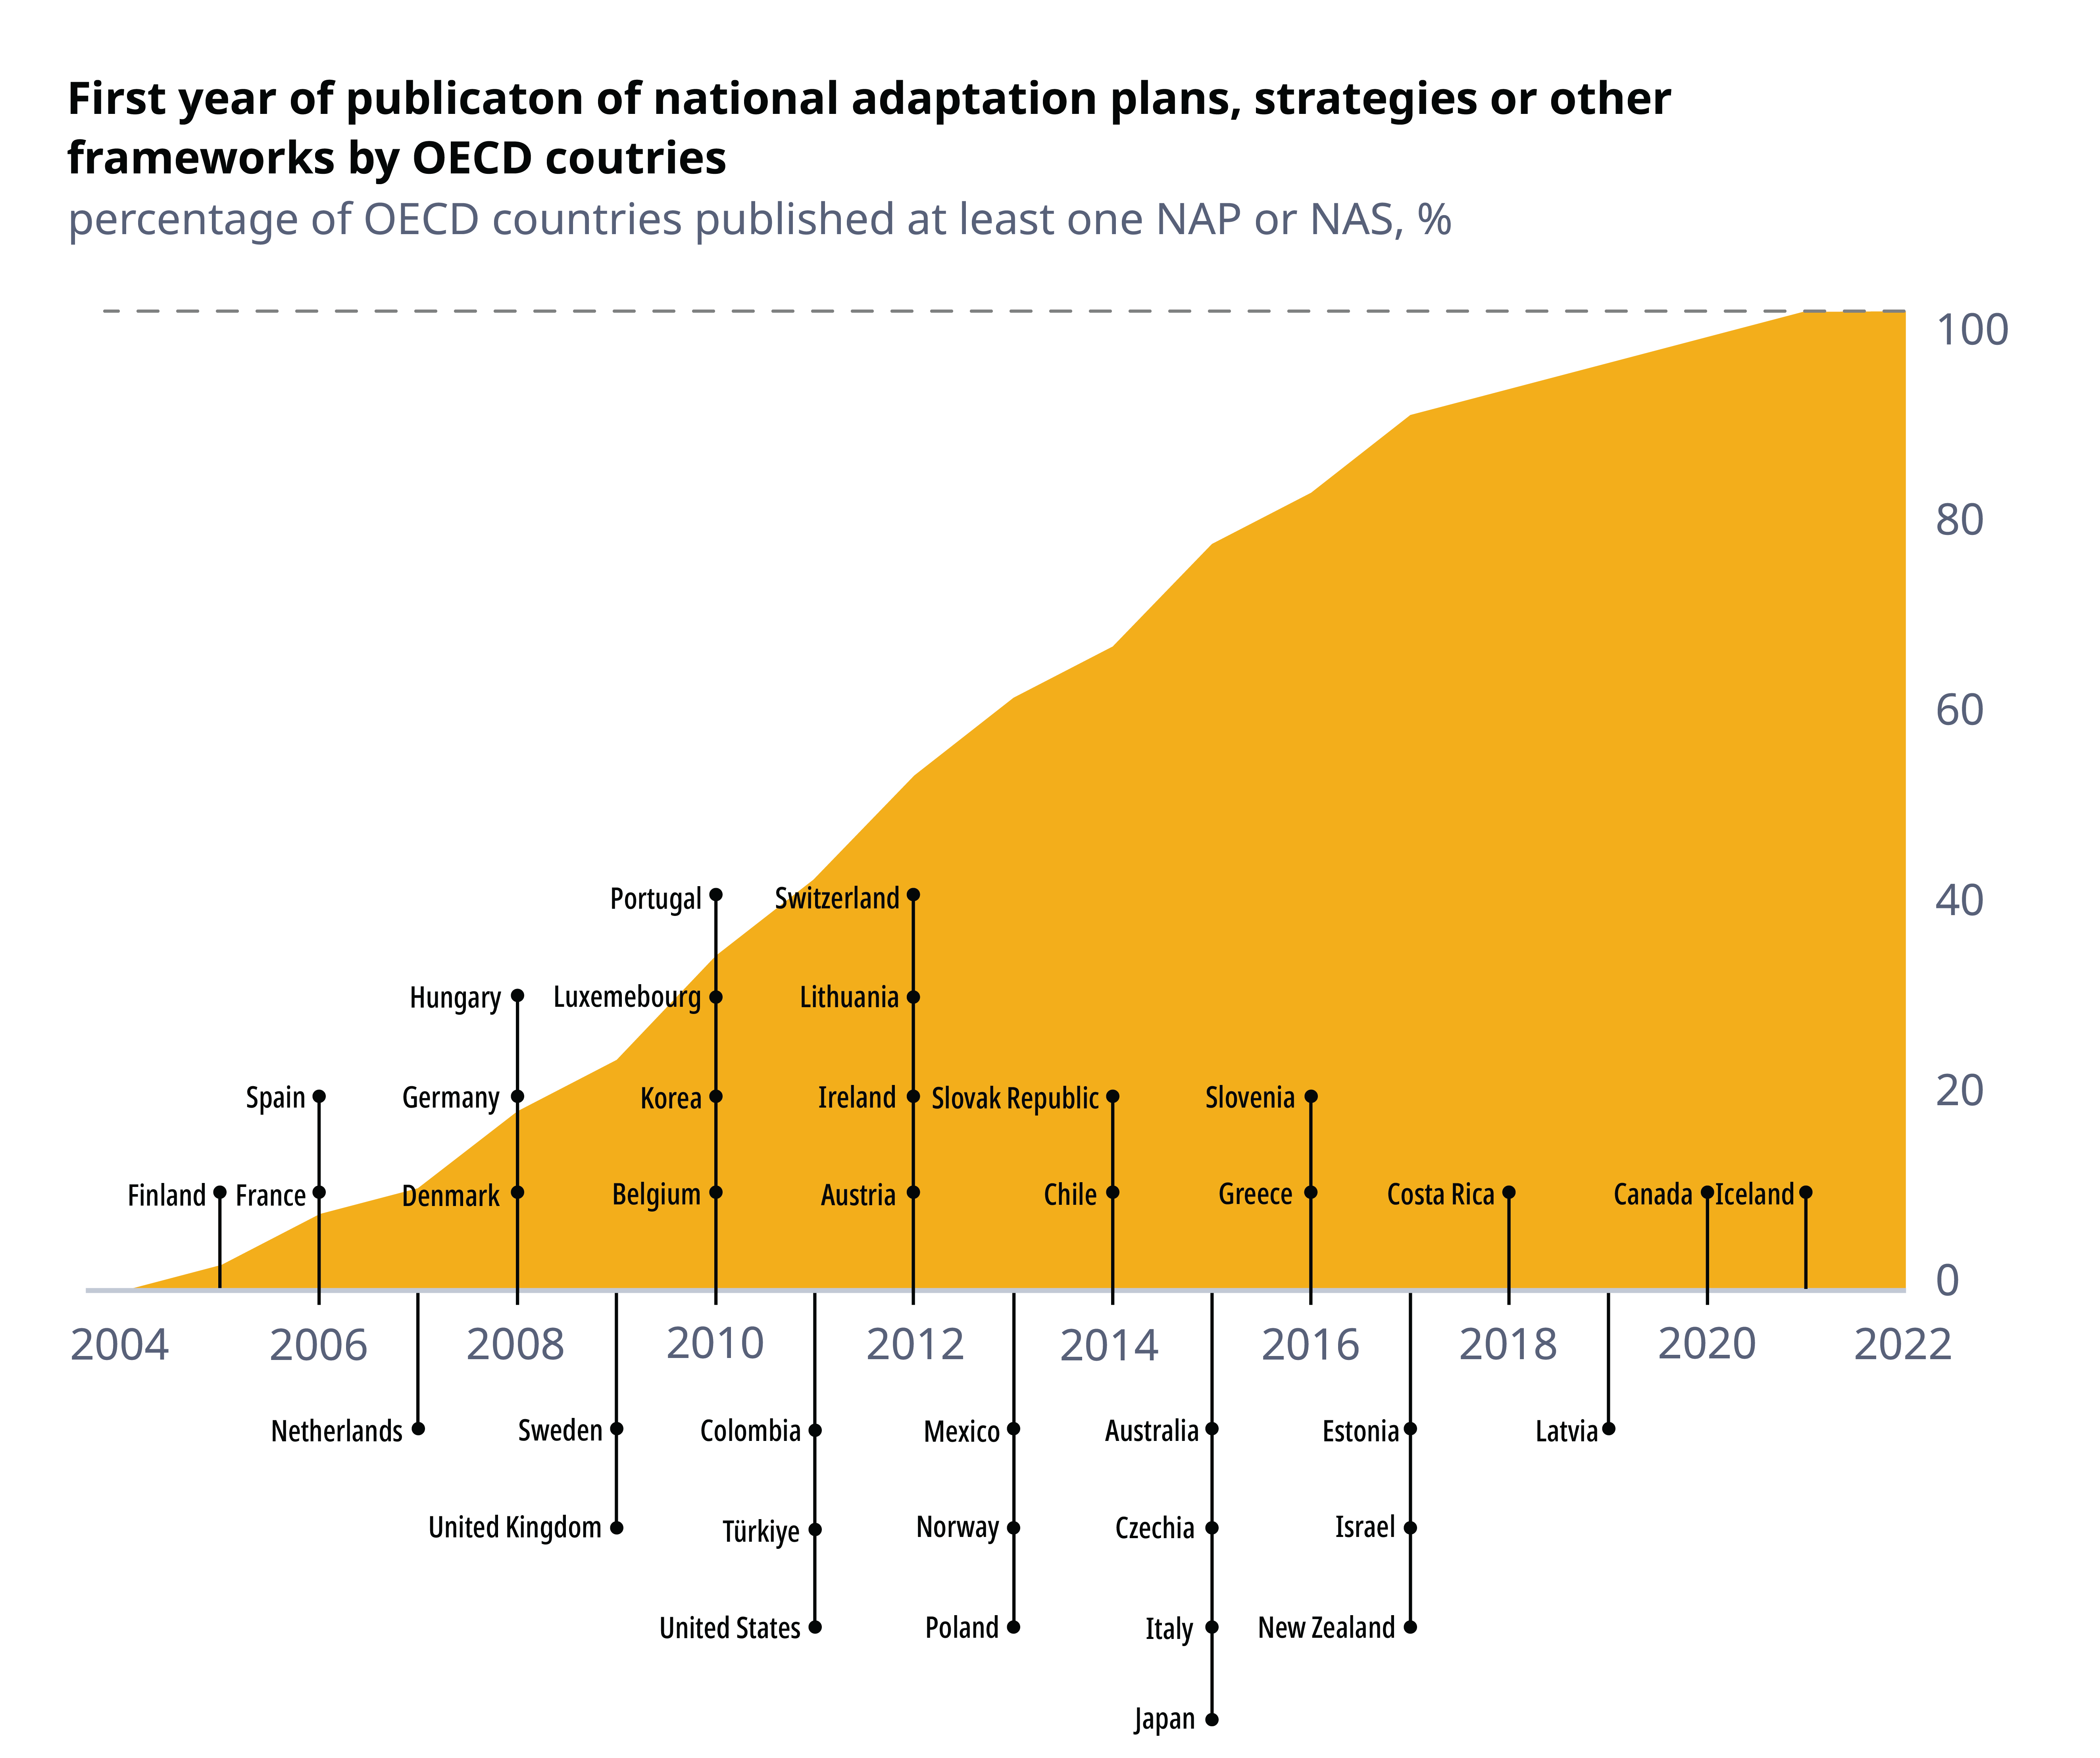 Chart of first year publication of national adaptation plans, strategies or other frameworks by OECD countries